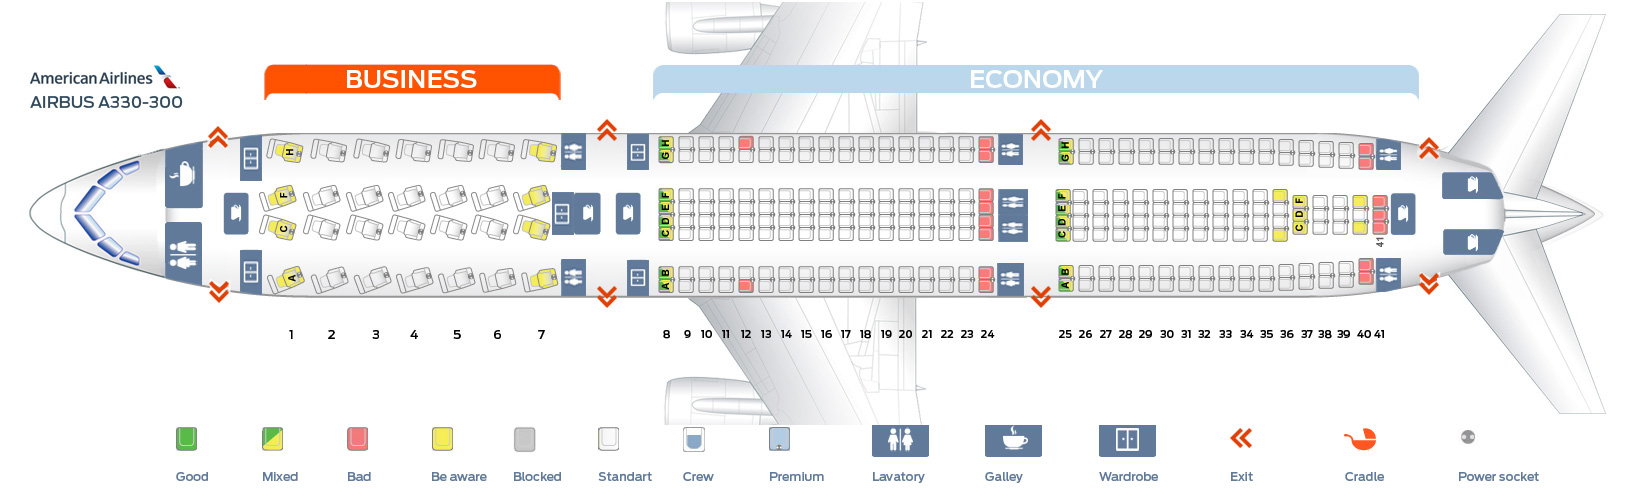 Airbus Industrie A330 300 Seating Chart